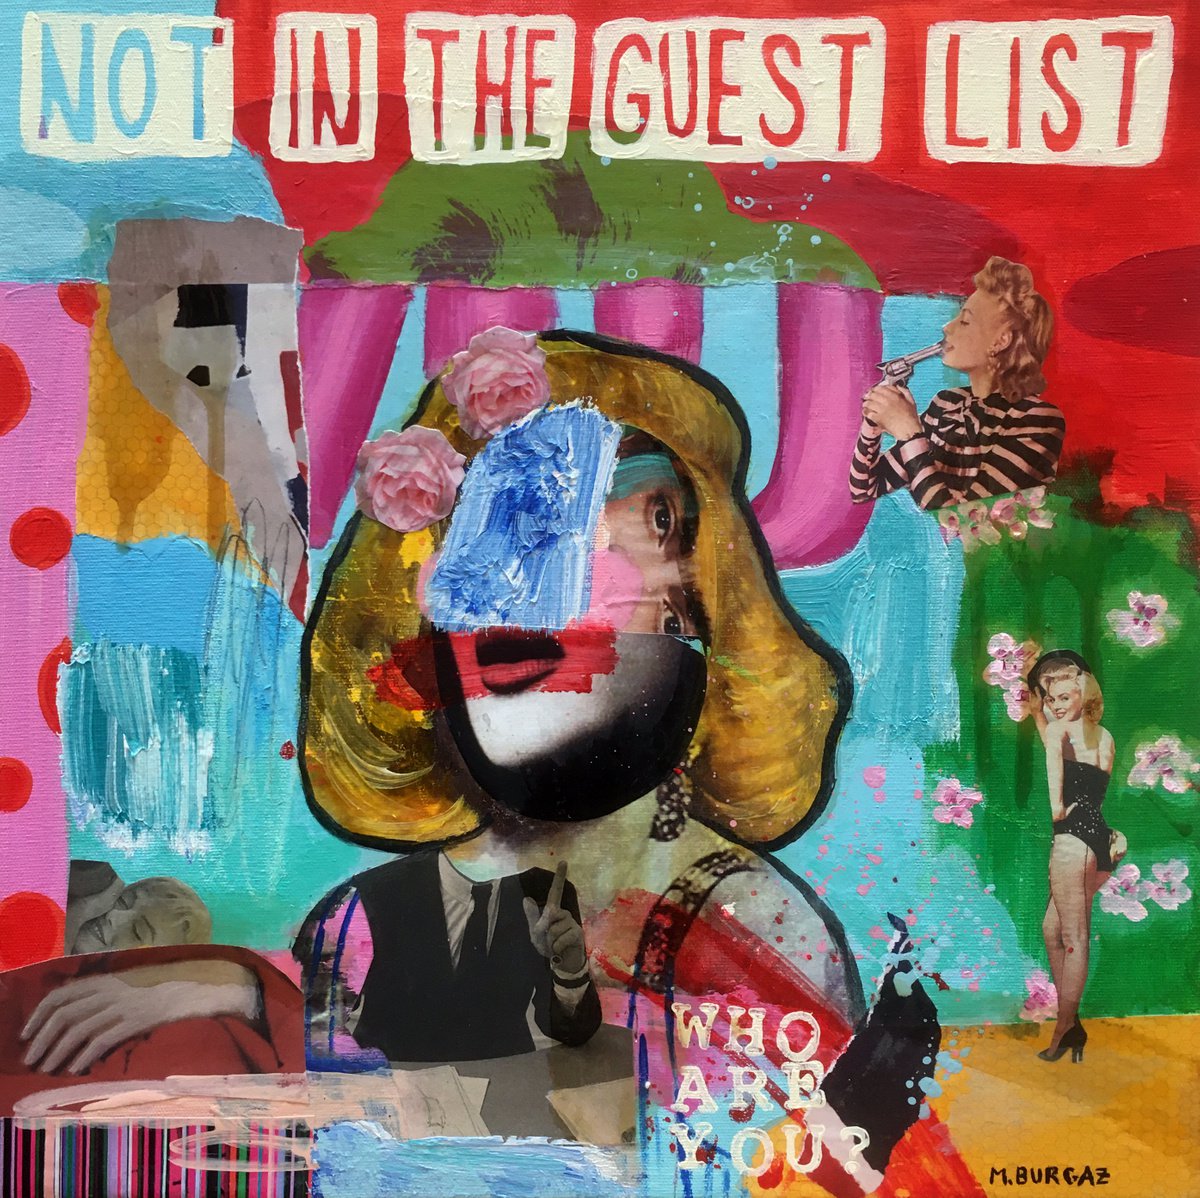 Not in the guest list by Mar�a Burgaz